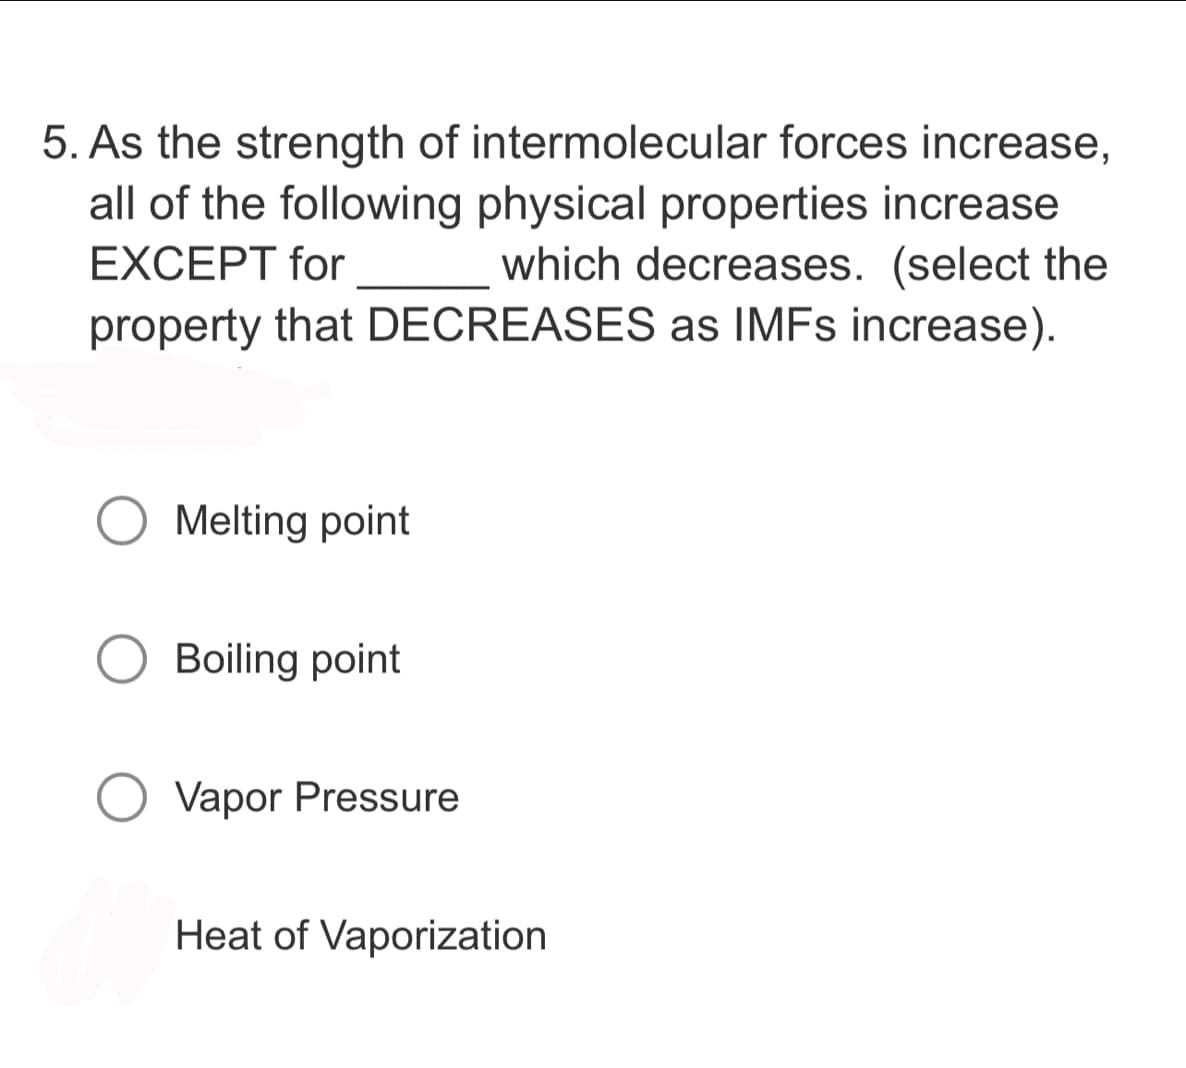 5. As the strength of intermolecular forces increase,
all of the following physical properties increase
EXCEPT for which decreases. (select the
property that DECREASES as IMFs increase).
Melting point
Boiling point
Vapor Pressure
Heat of Vaporization